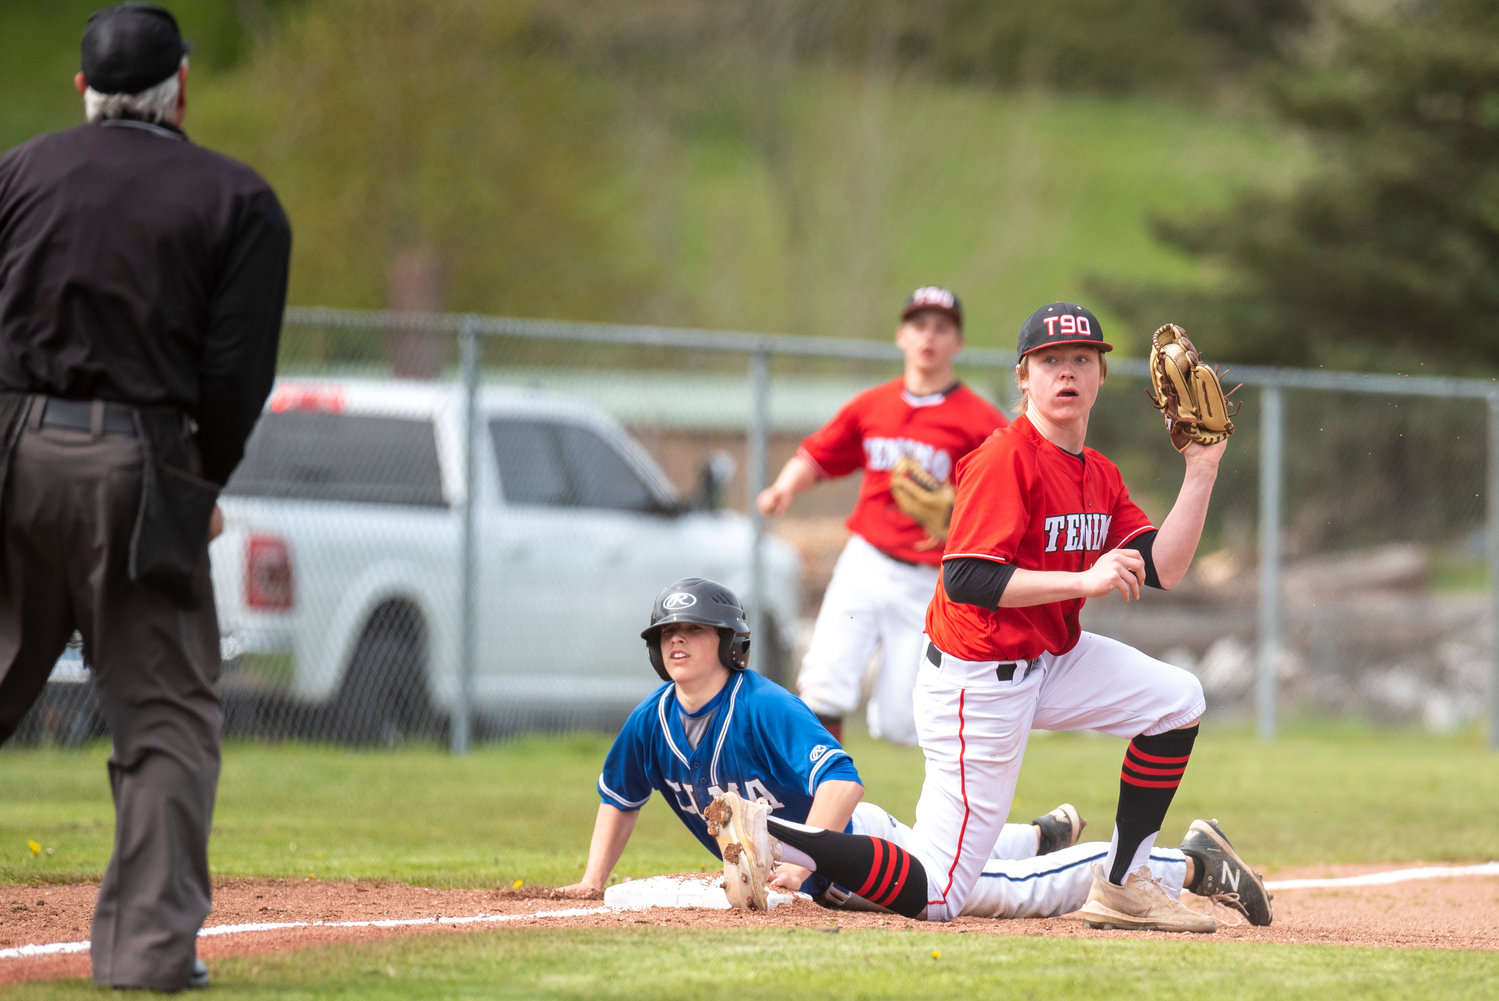 Tenino third baseman Mikey Vassar holds up the ball and looks toward the umpire after tagging an Elma runner out during a home game on April 29.